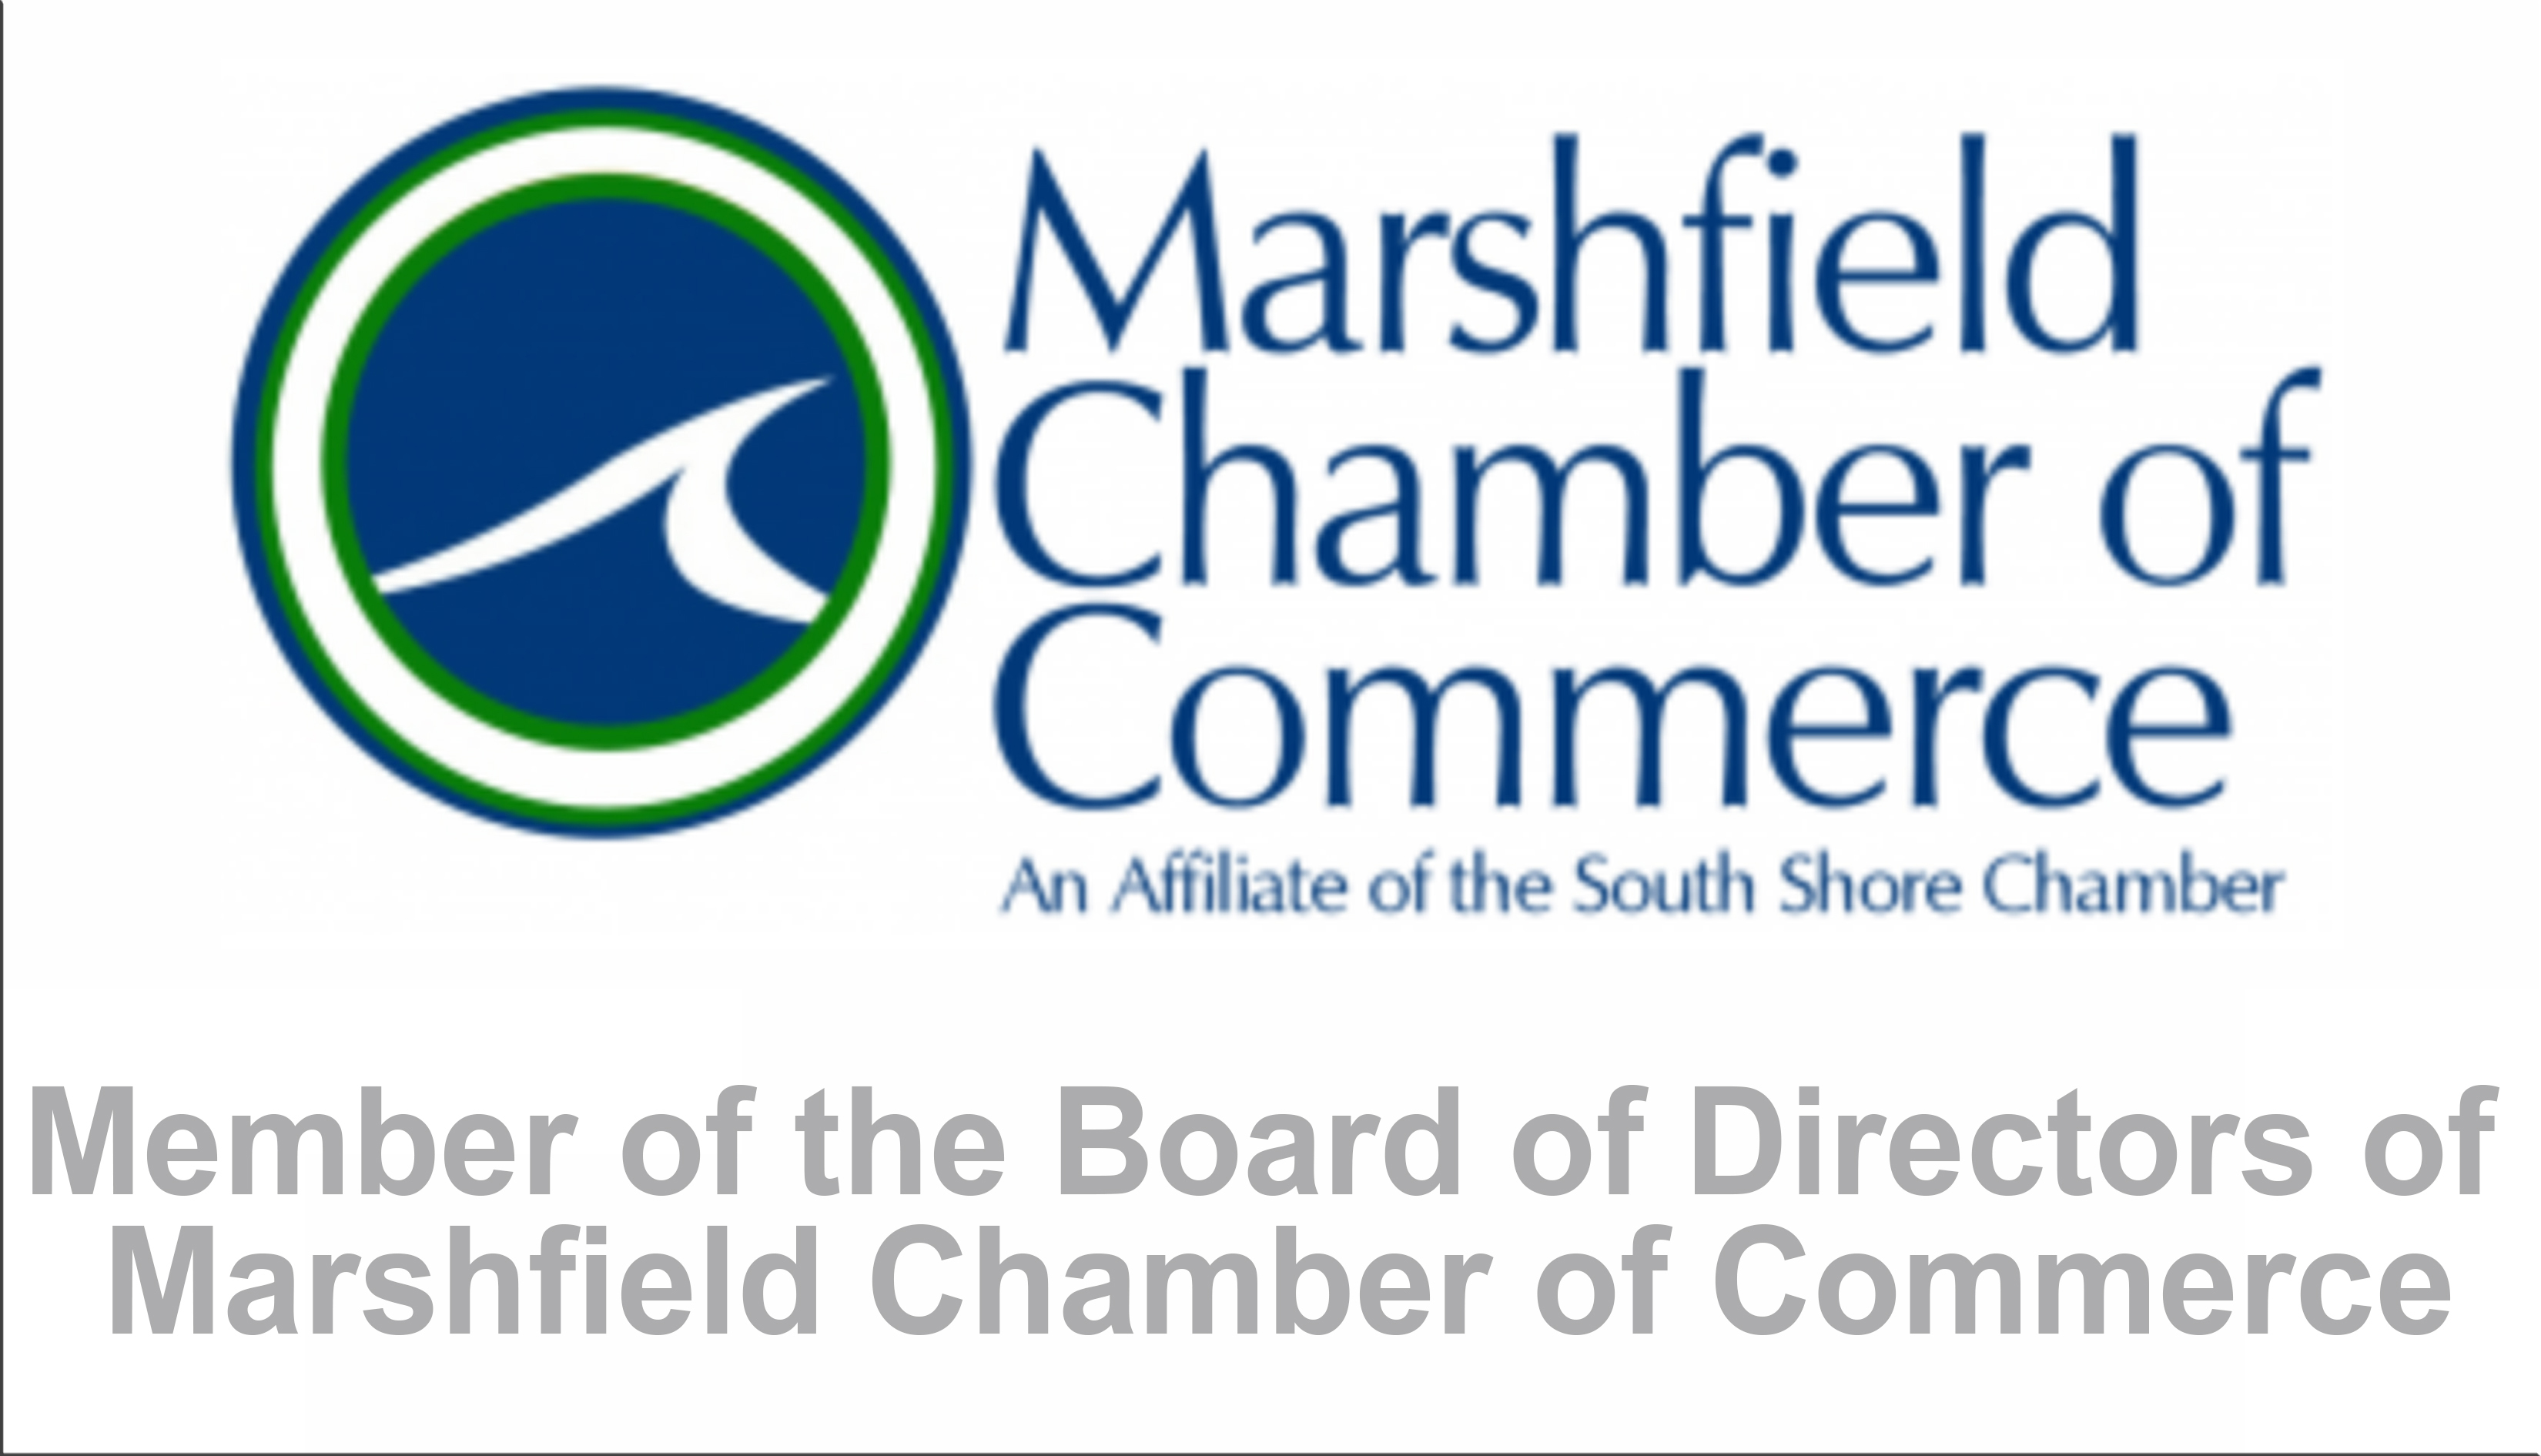 Member of the Board of Directors of Marshfield Chamber of Commerce